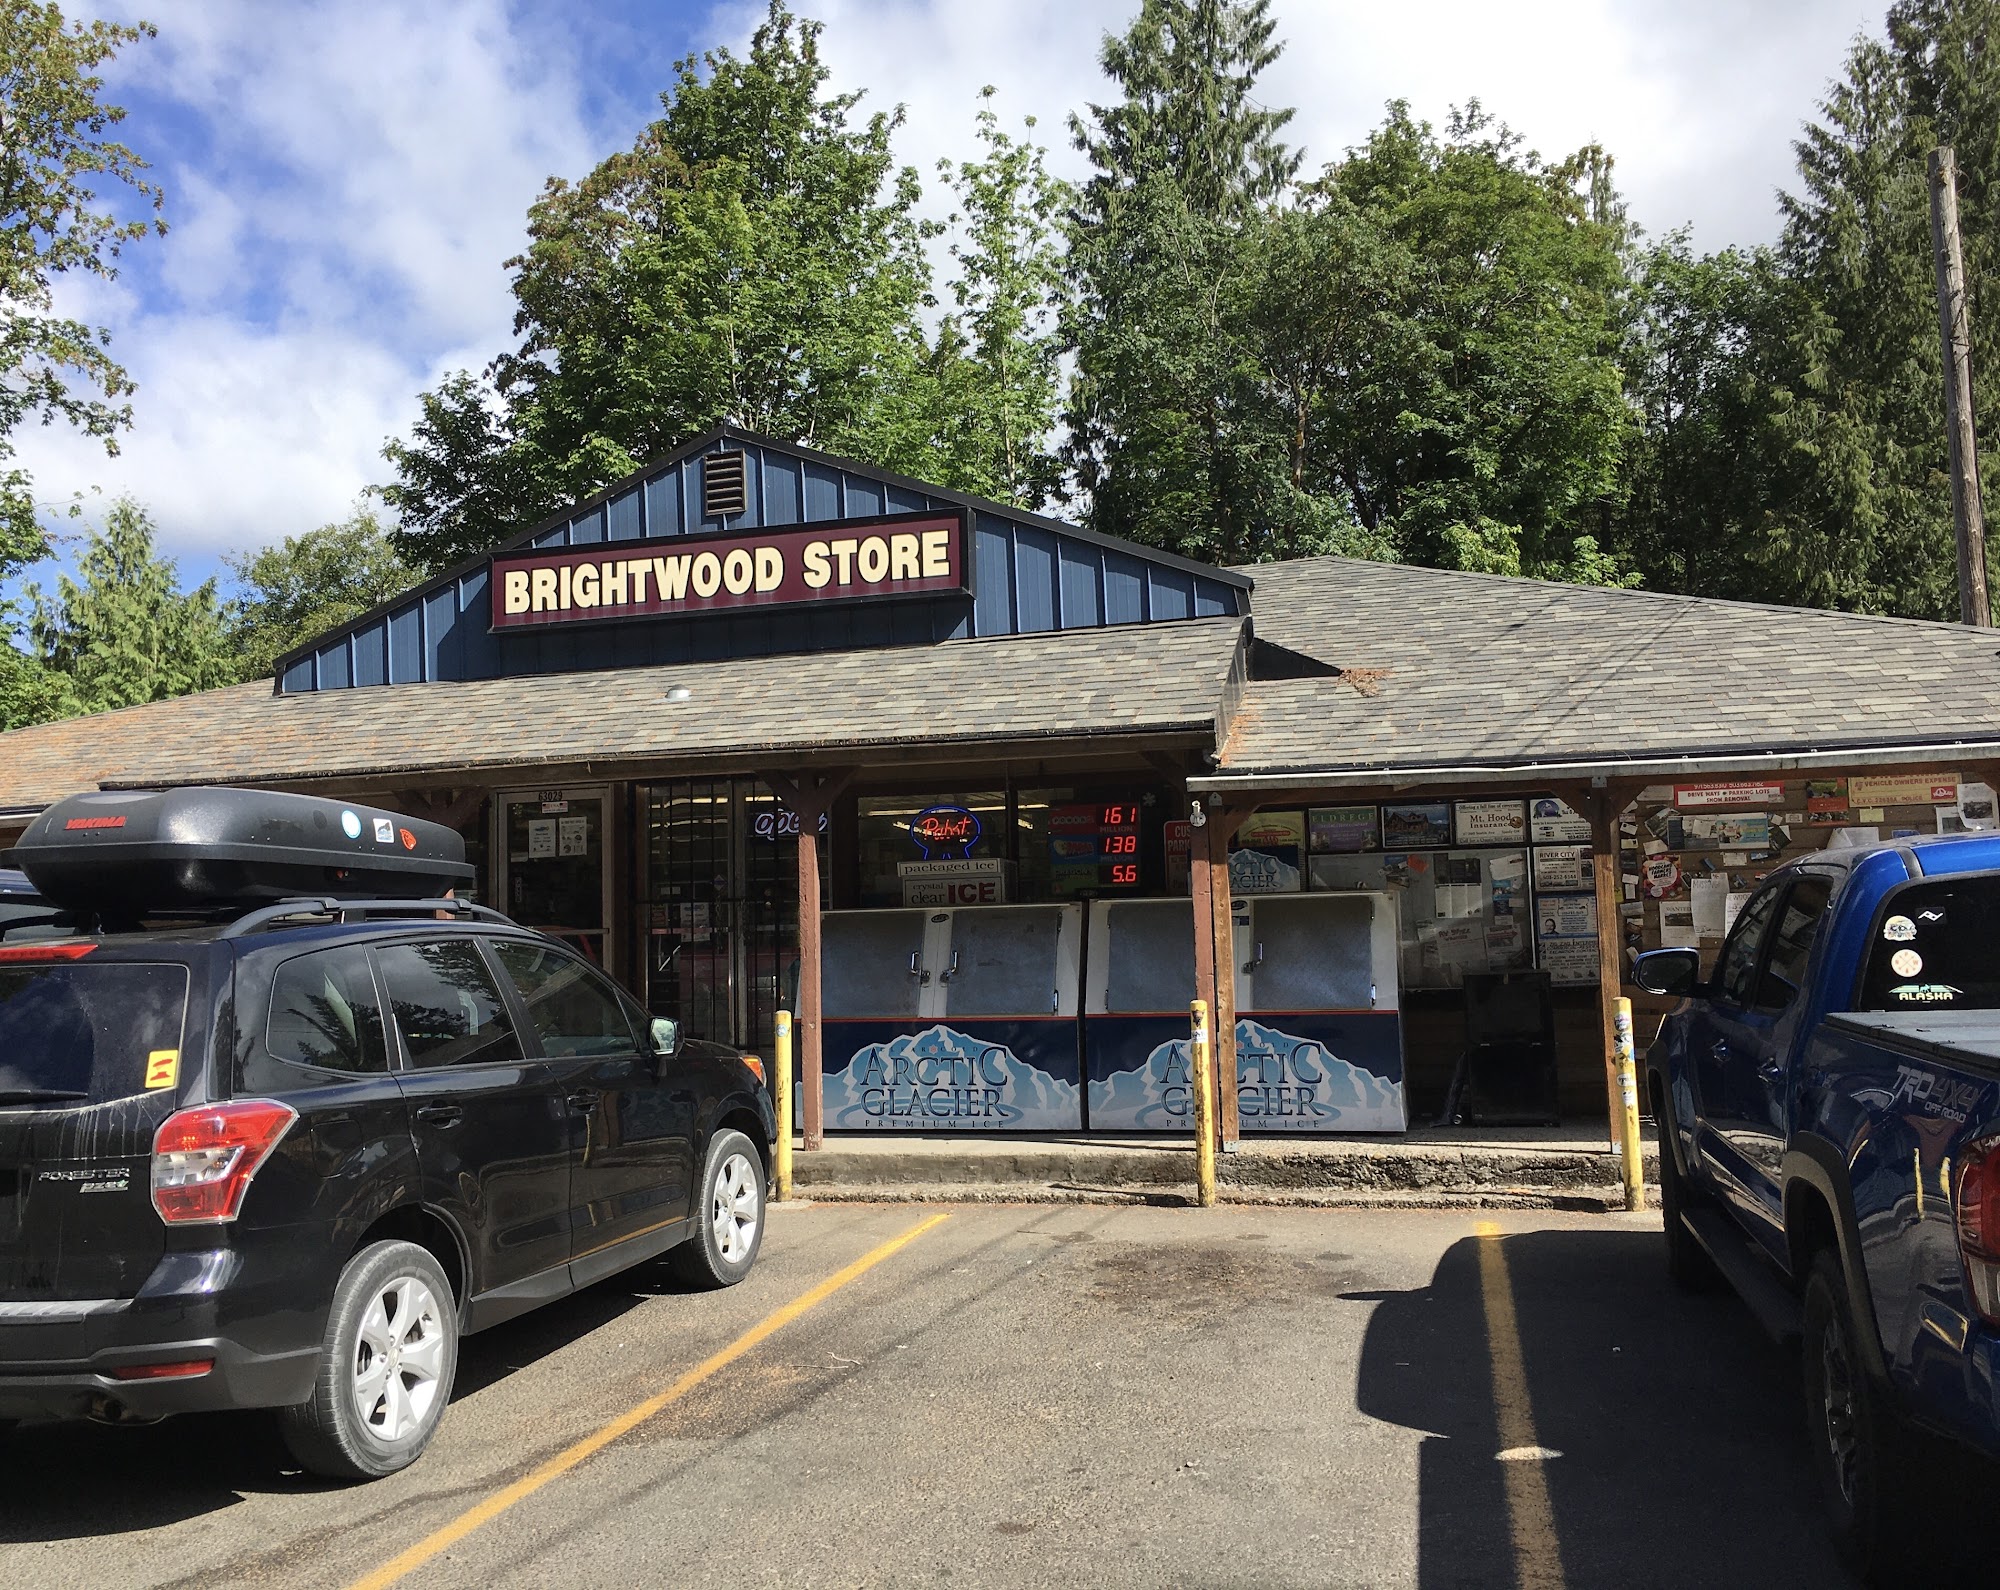 The Brightwood Store